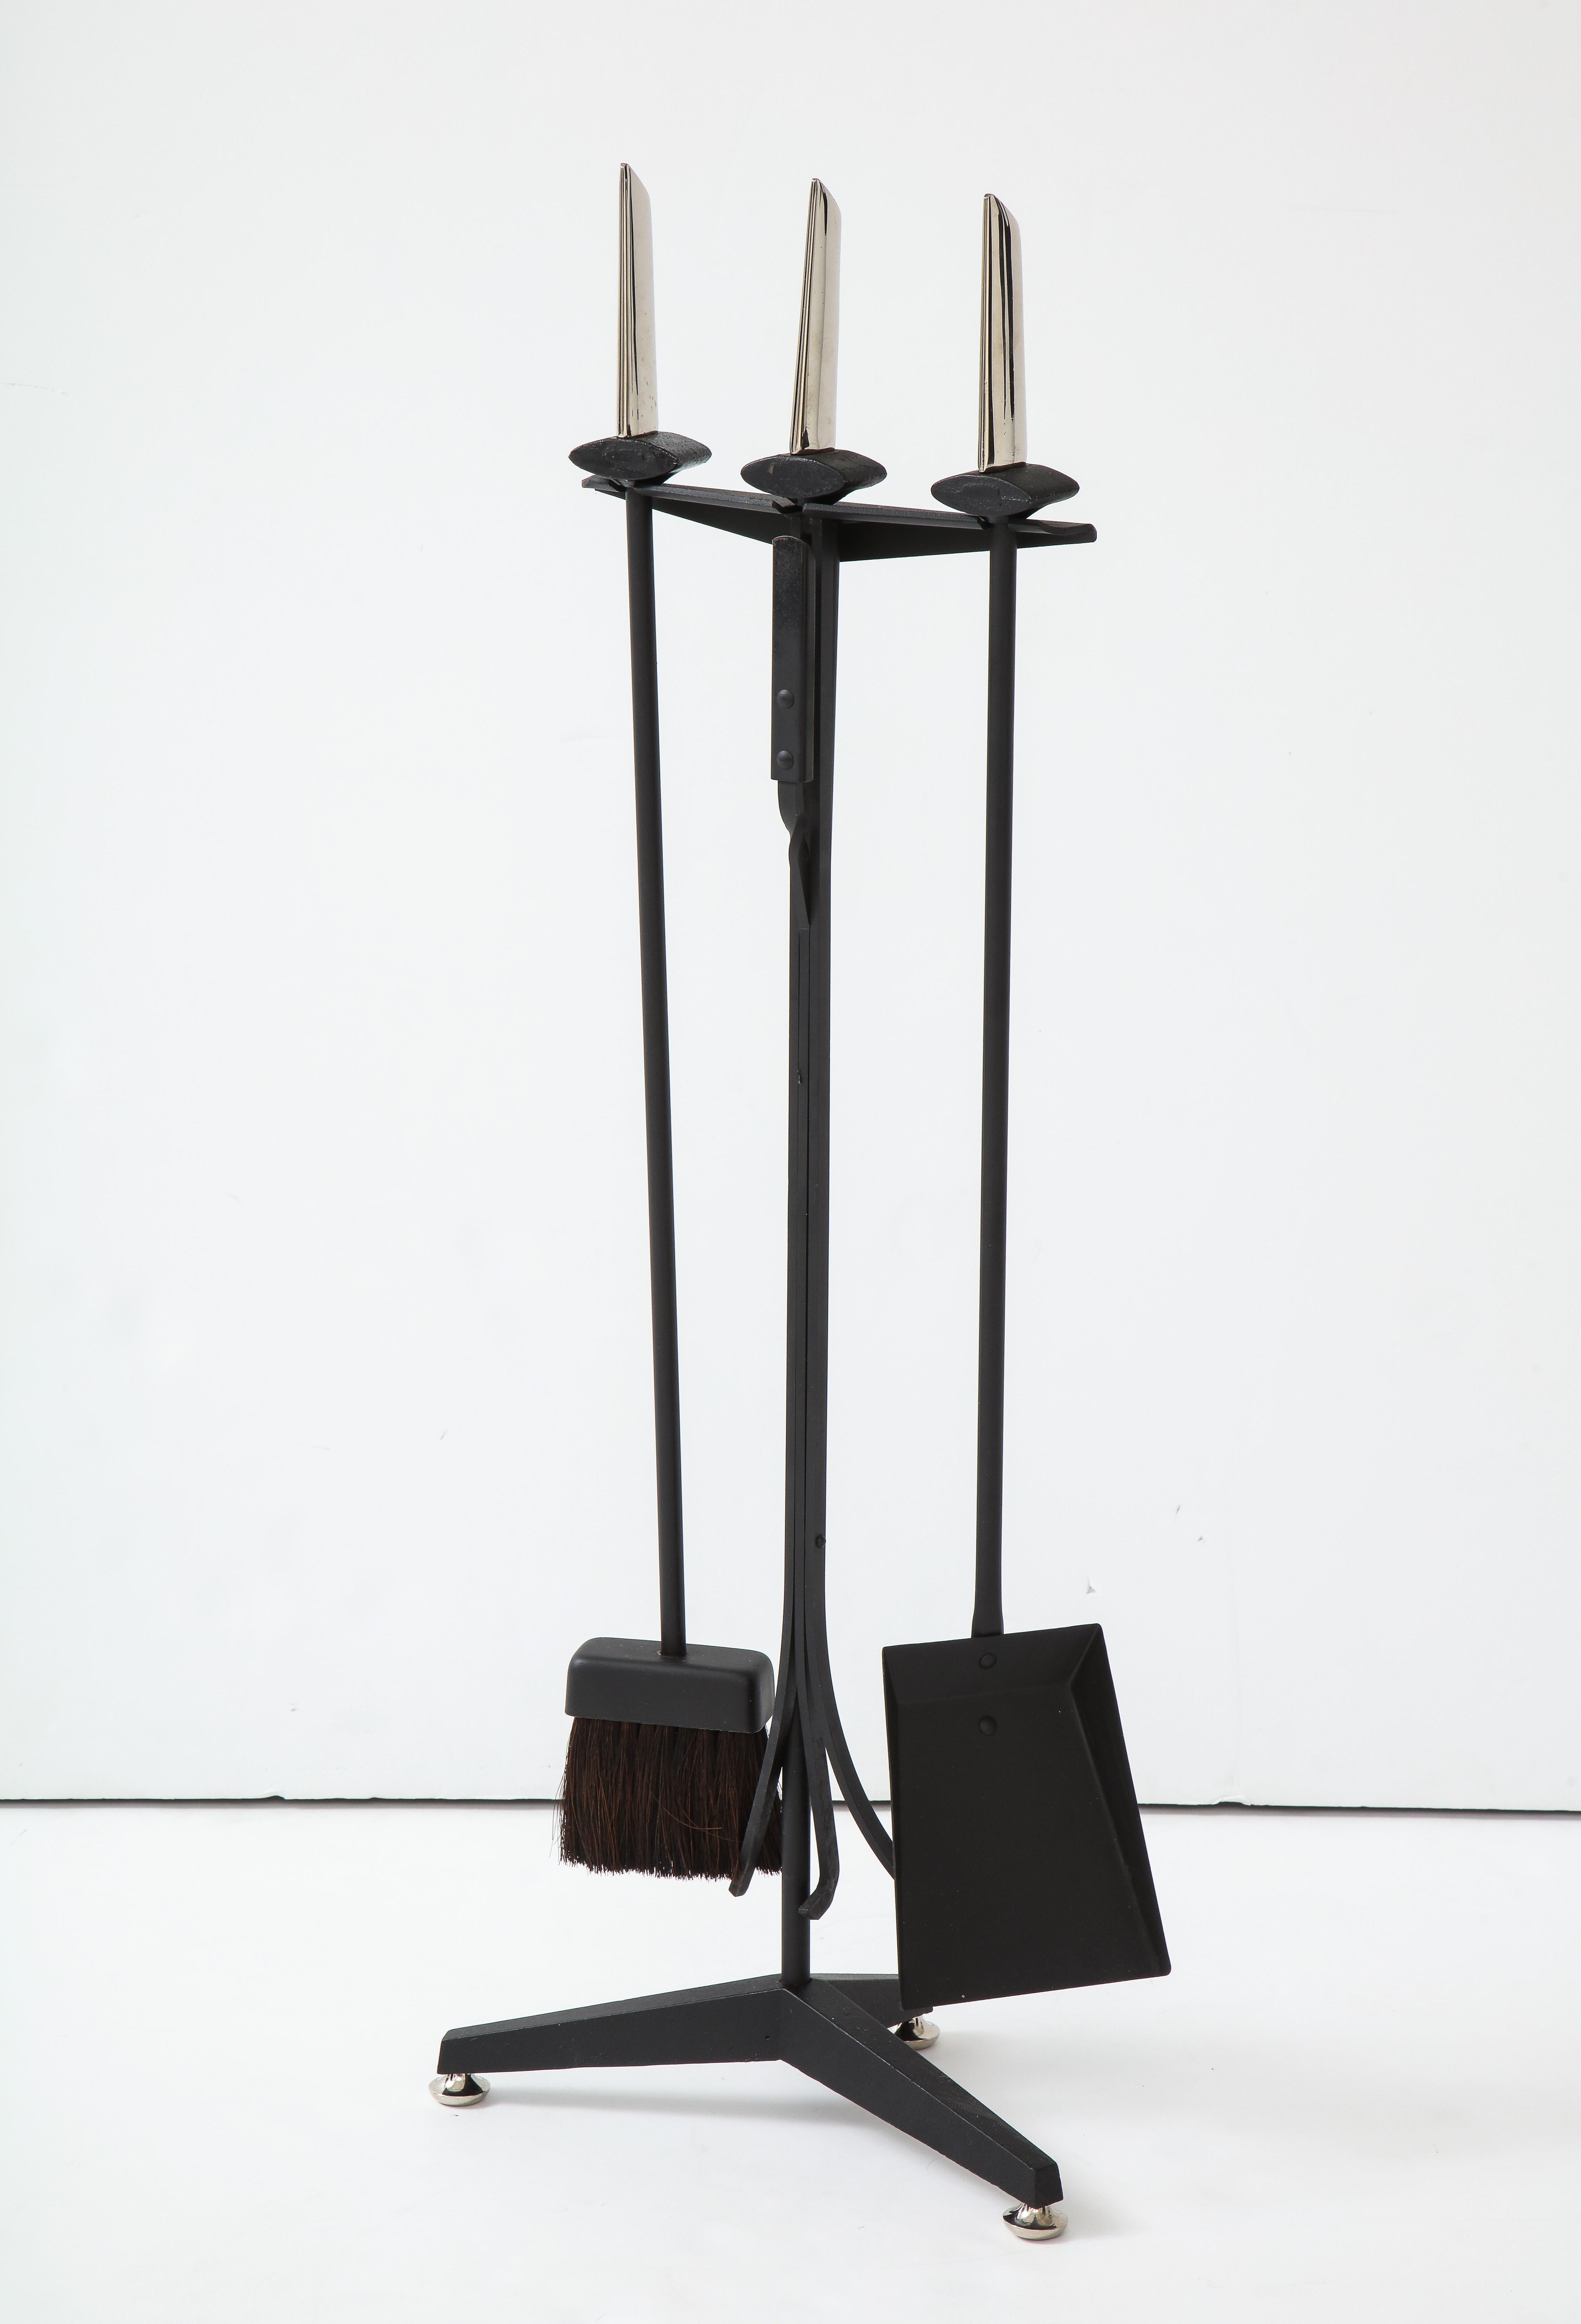 Modernist set of Art Deco fire tools in blackened iron with polished nickel blade handles and feet. Set includes stand, broom, tongs/poker, and shovel.